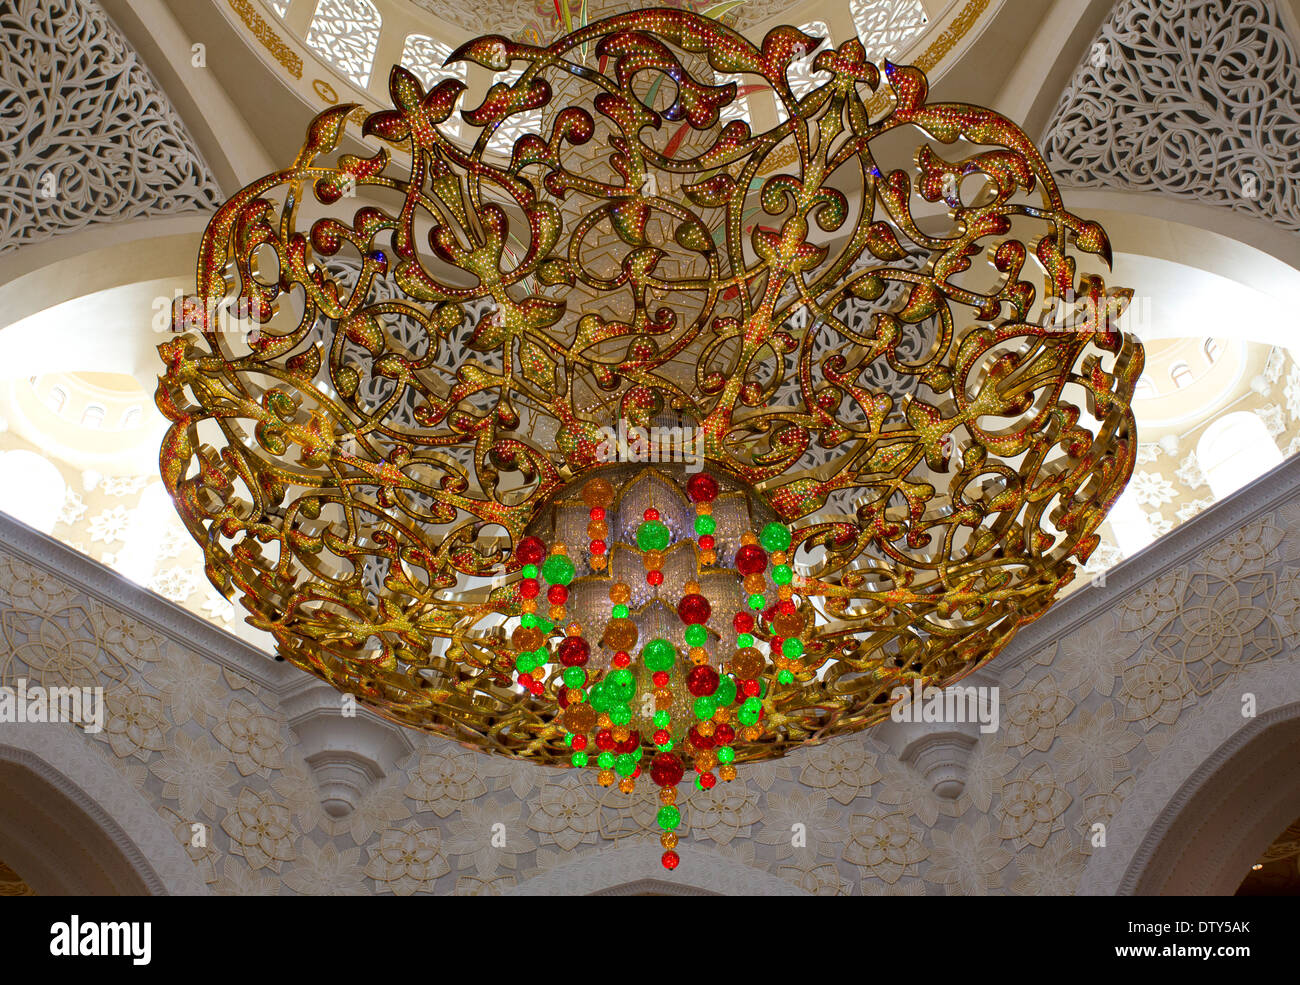 Sheikh Zayed Grand Mosque in Abu Dhabi United Arab Emirates interior showing a giant decoration hanging from the ceiling. Stock Photo